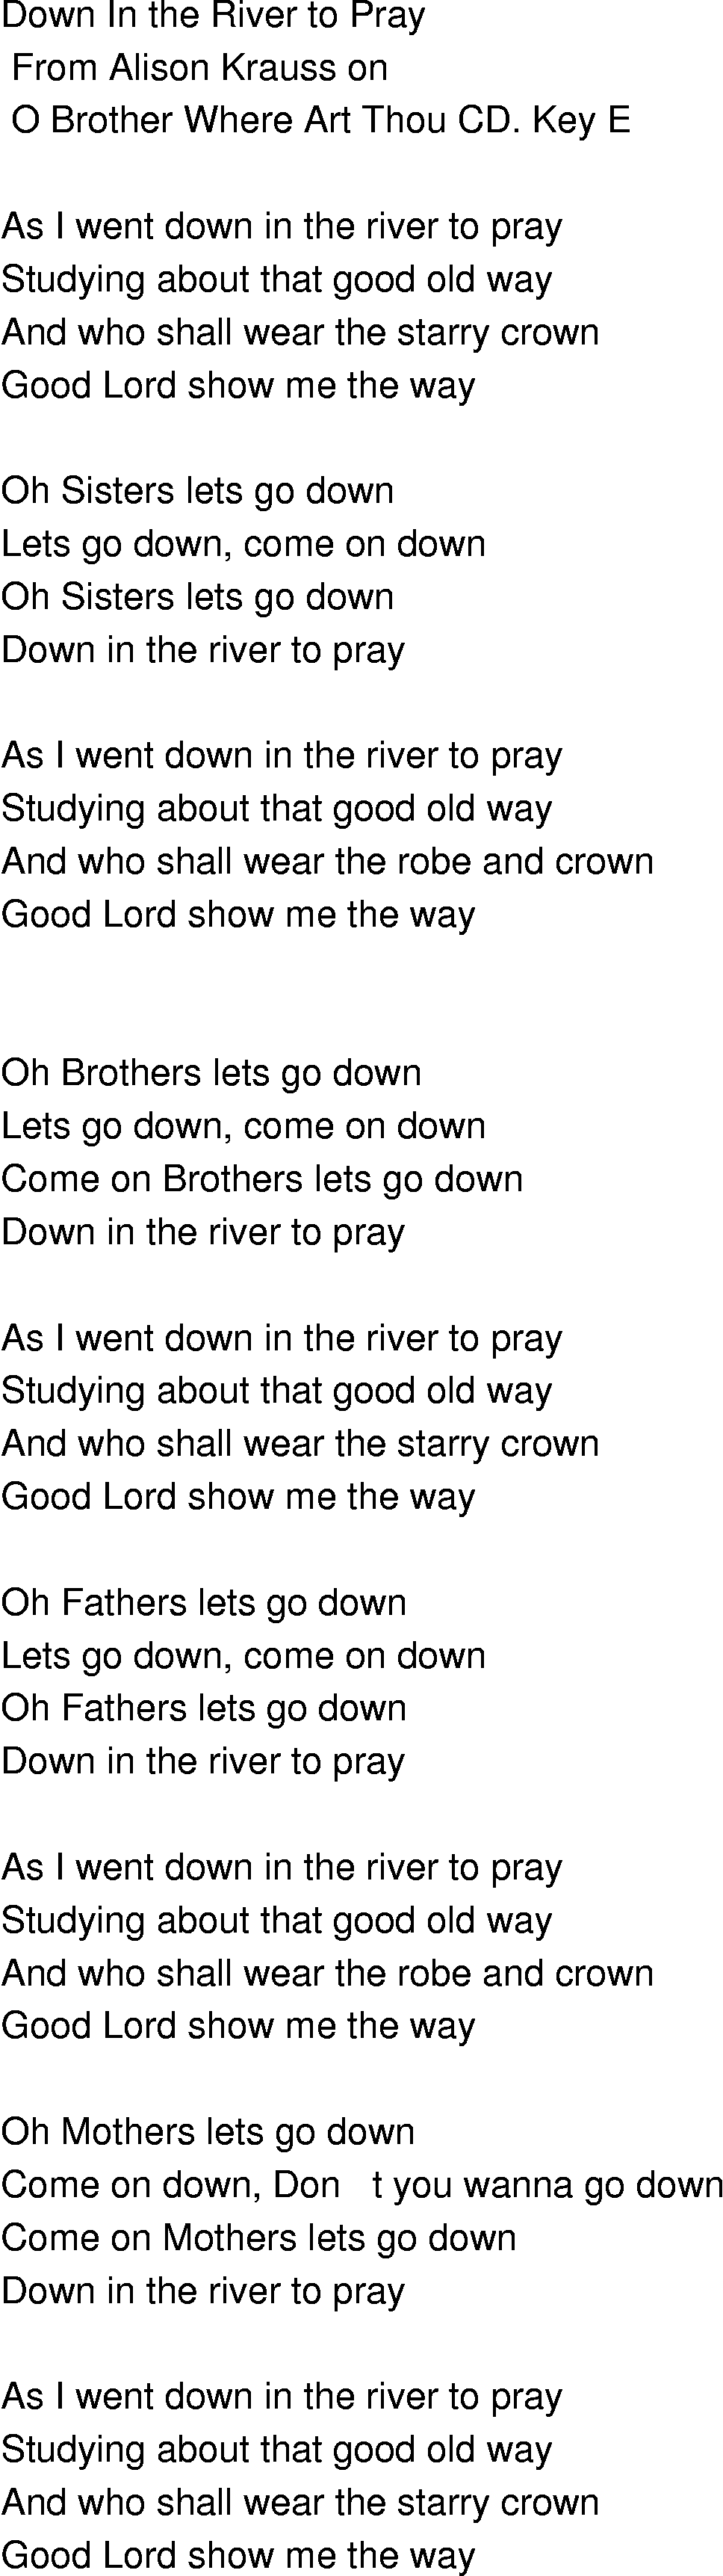 Old-Time (oldtimey) Song Lyrics - down in the river to pray